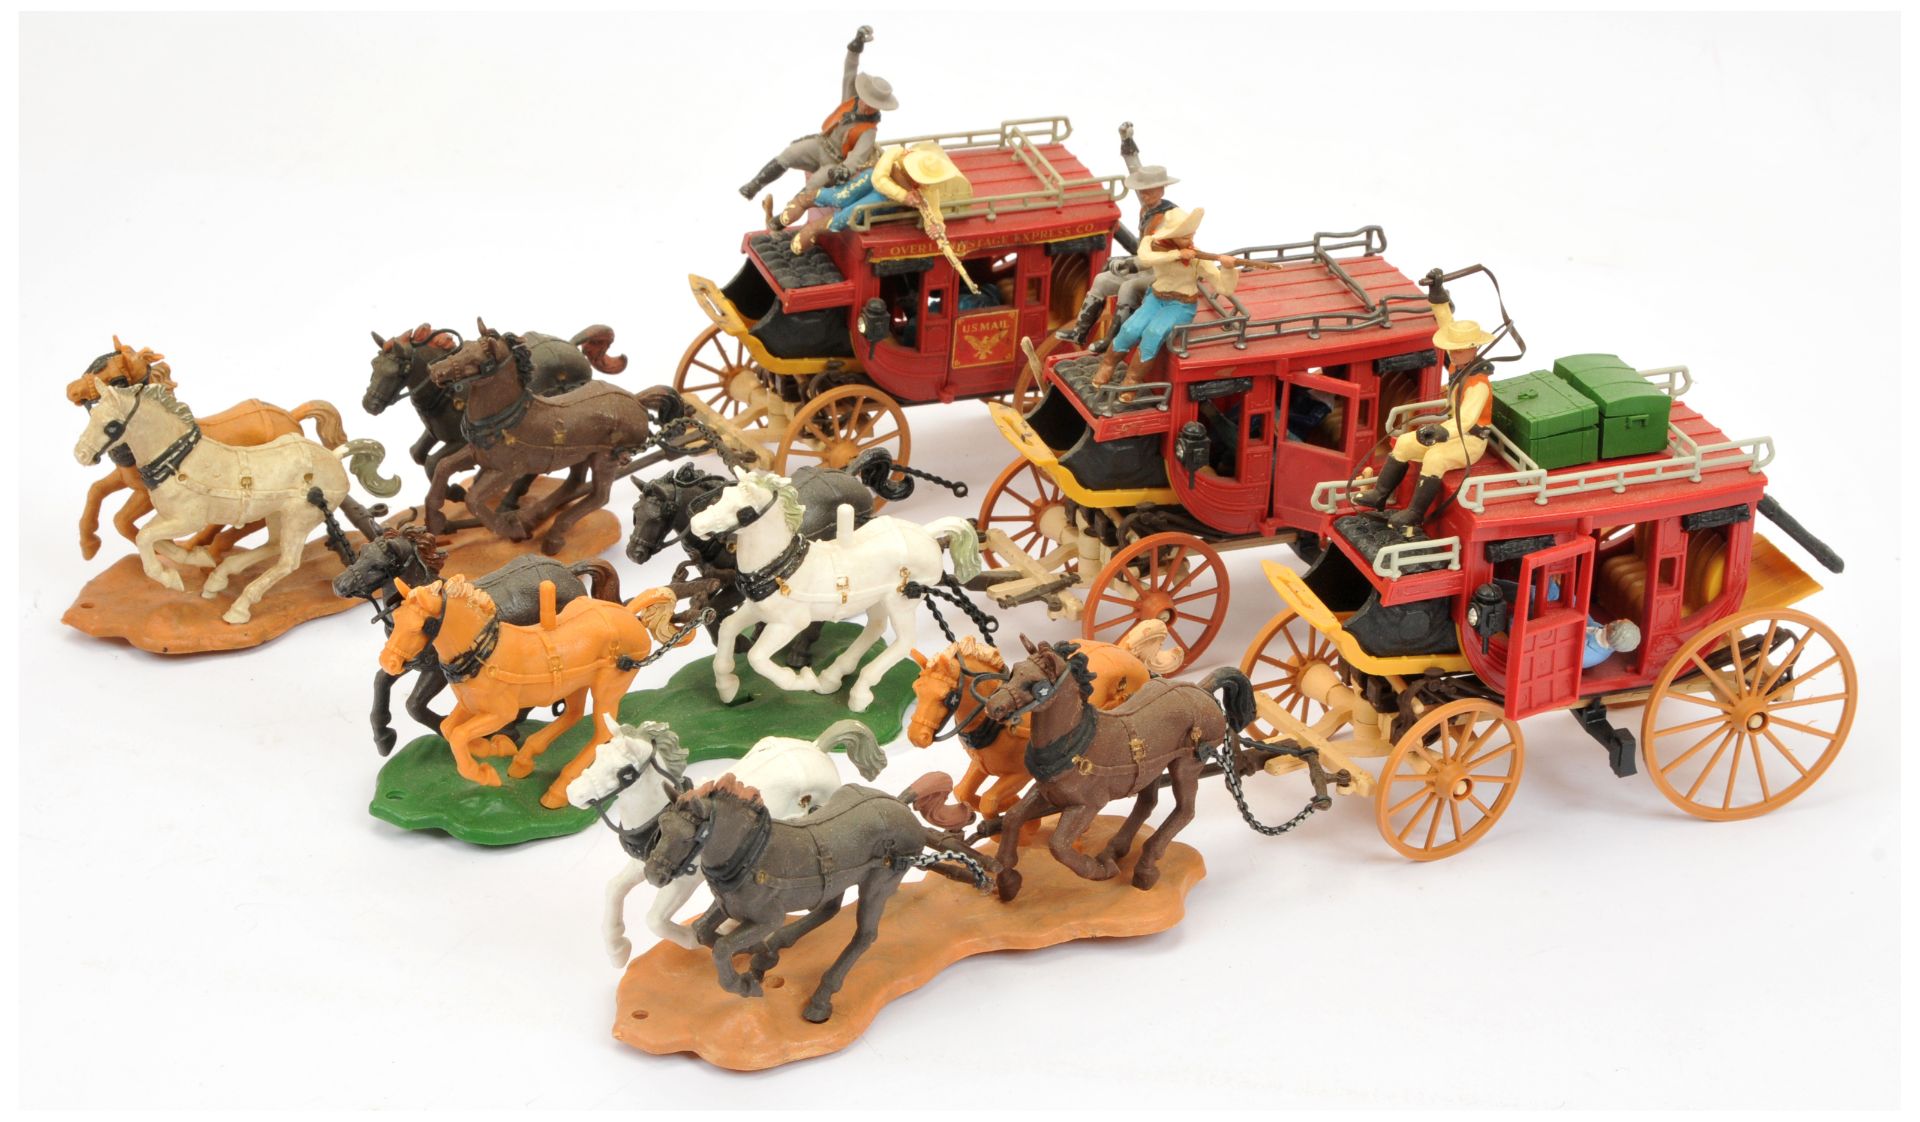 Britains Wild West Series - Set 7615 'Concord Overland Stage', an unboxed group